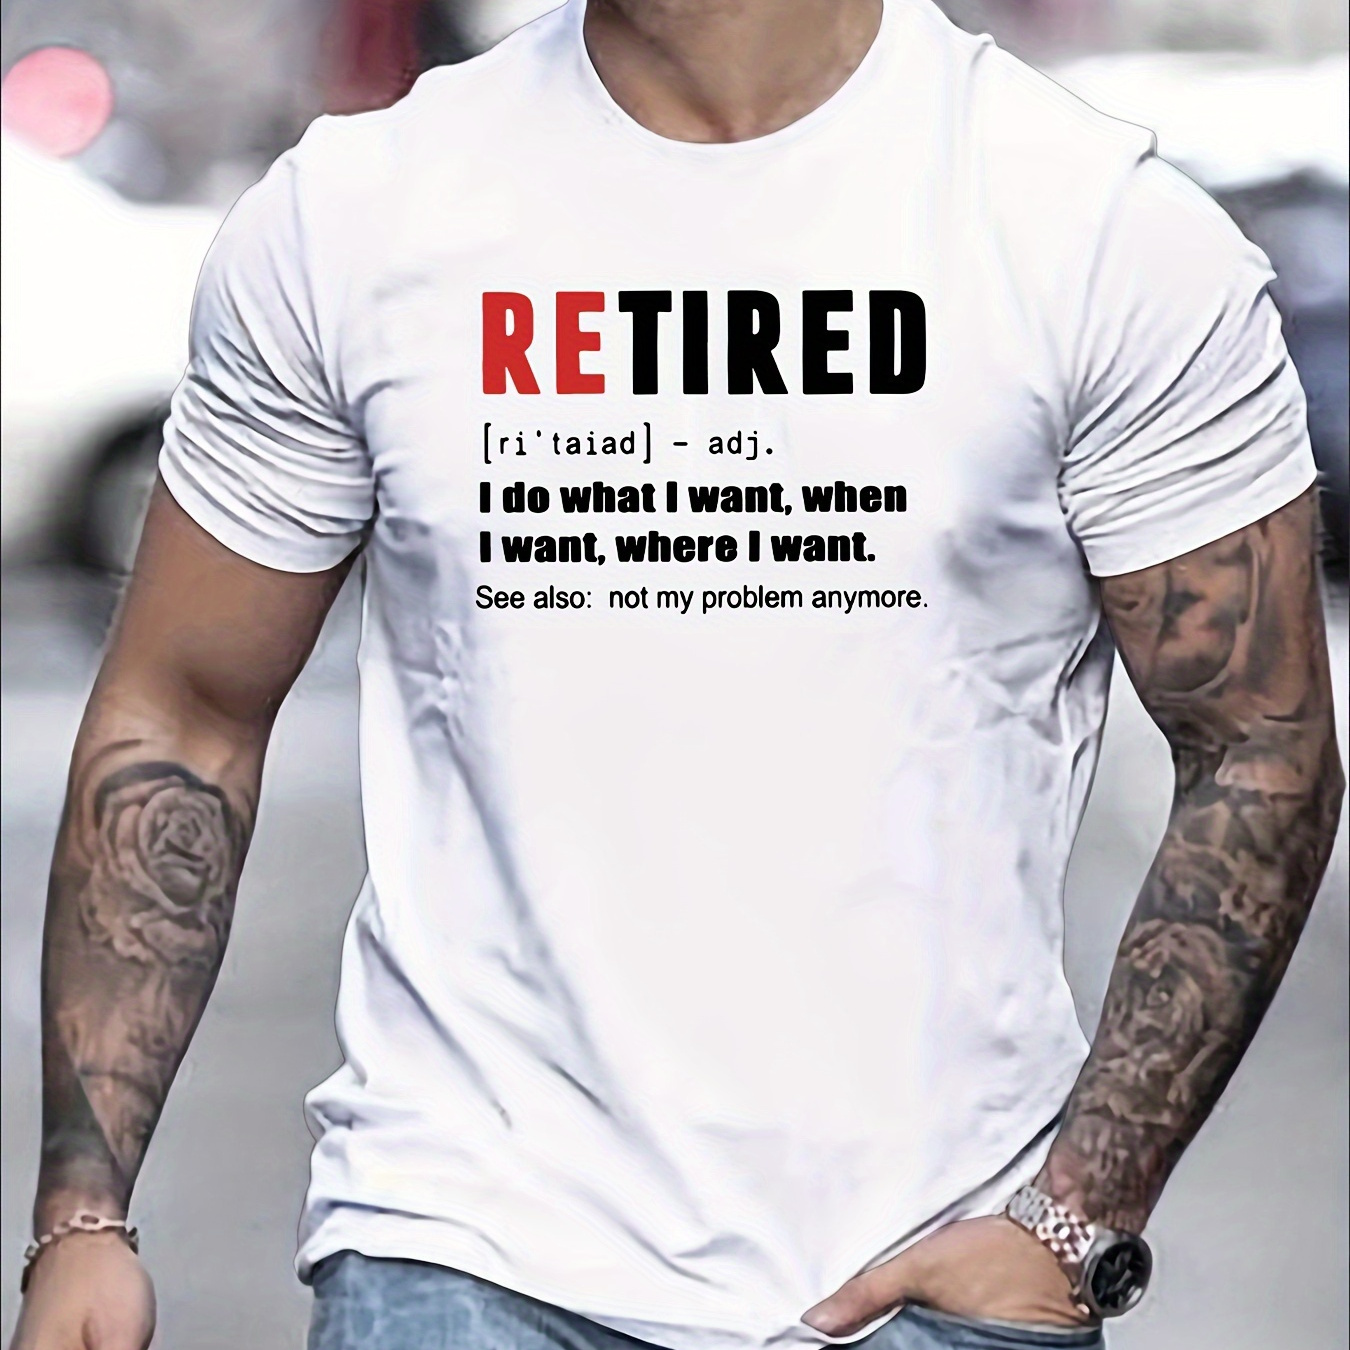 

Letter Retired Print T-shirt, Tees For Men, 100% Cotton Comfortable Casual Short Sleeve T-shirt For Summer